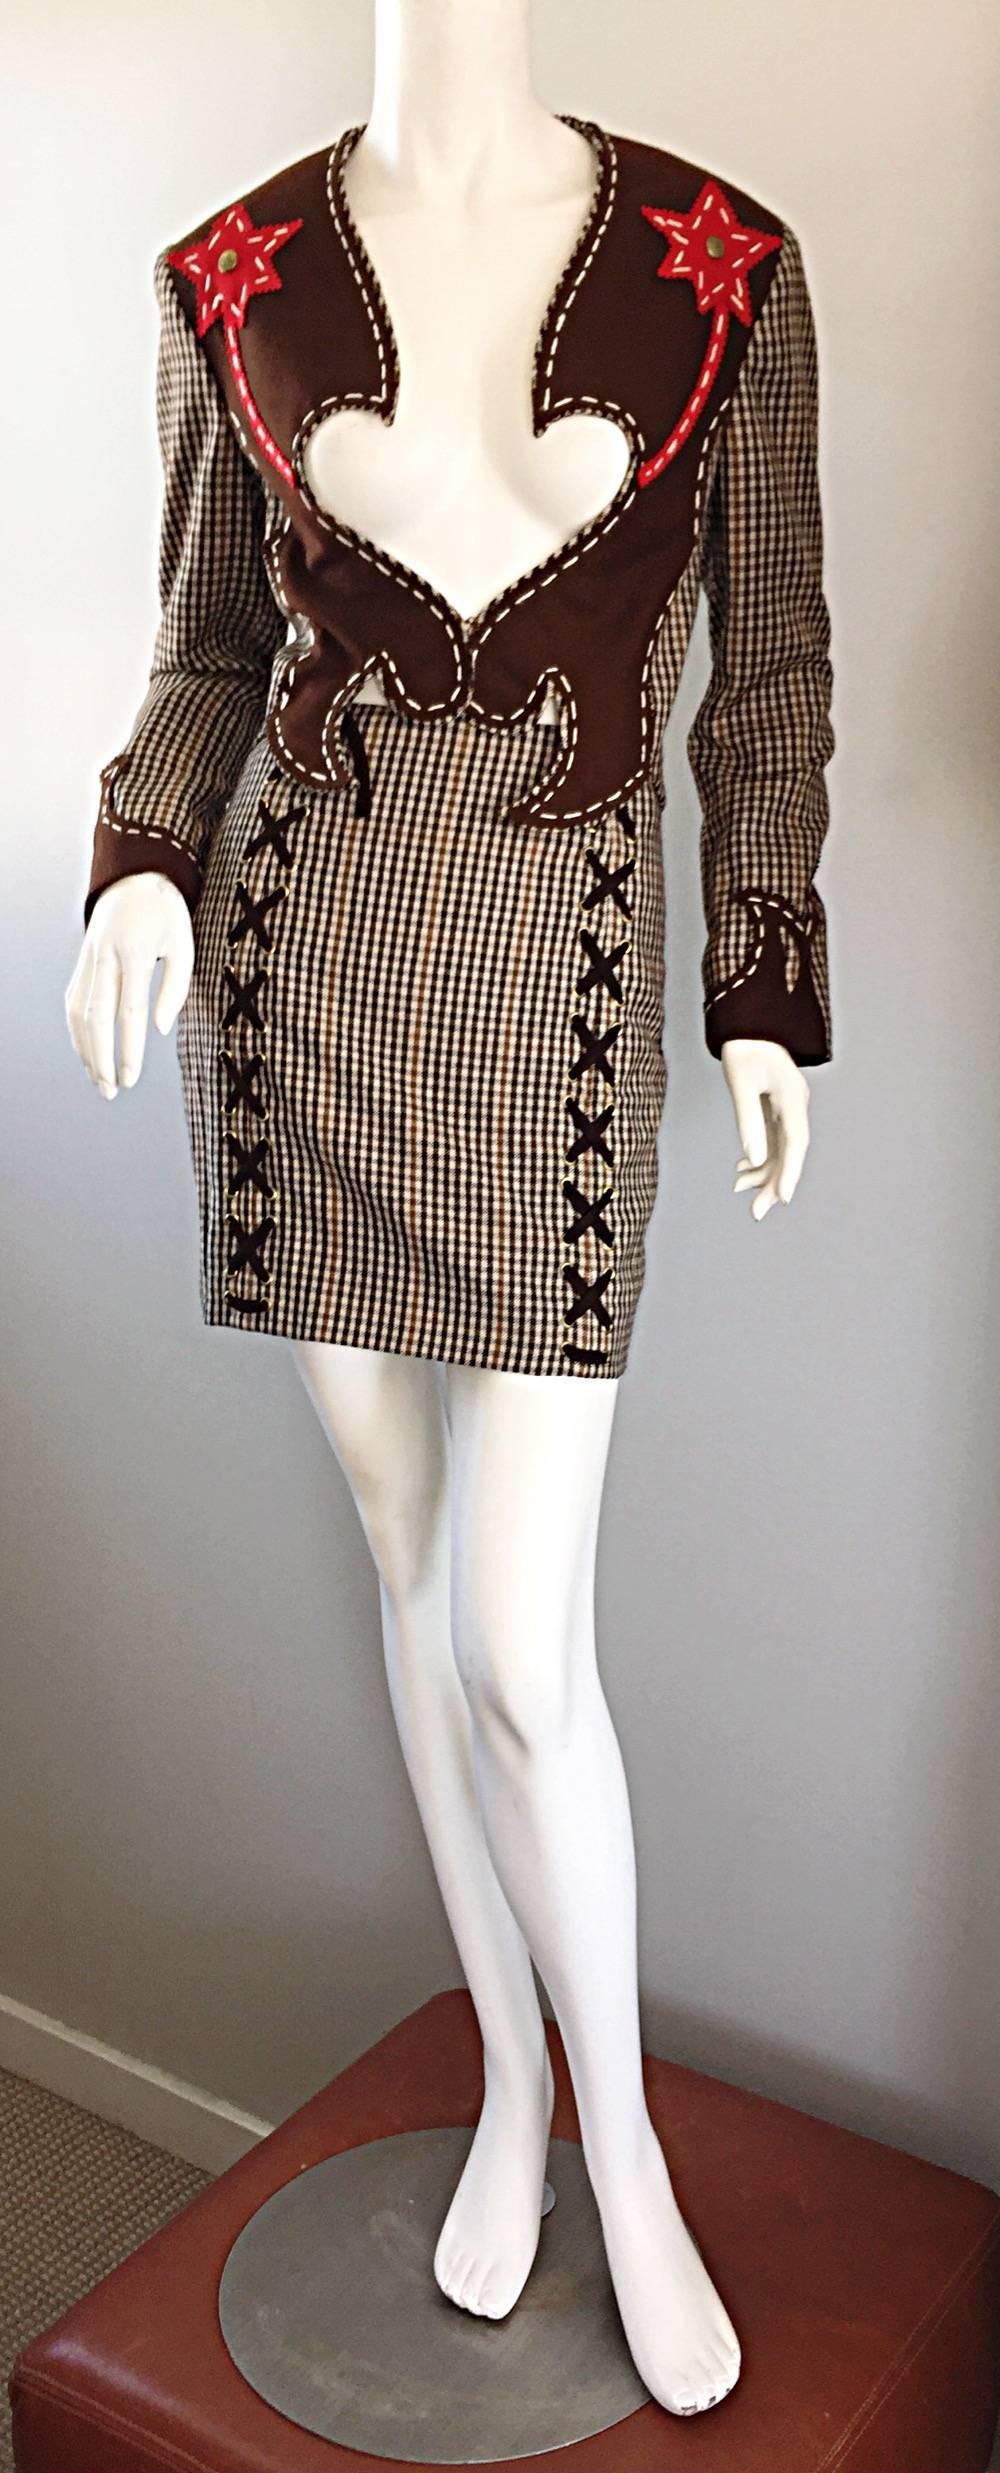 Incredibly rare early 1990s vintage MOSCHINO Cheap and Chic houndstooth plaid 'Sheriff' Collection skirt suit! Features an allover brown and ivory houndstooth gingham print, with thin red lines. Brown suede criss-cross lace-ups at front and back of